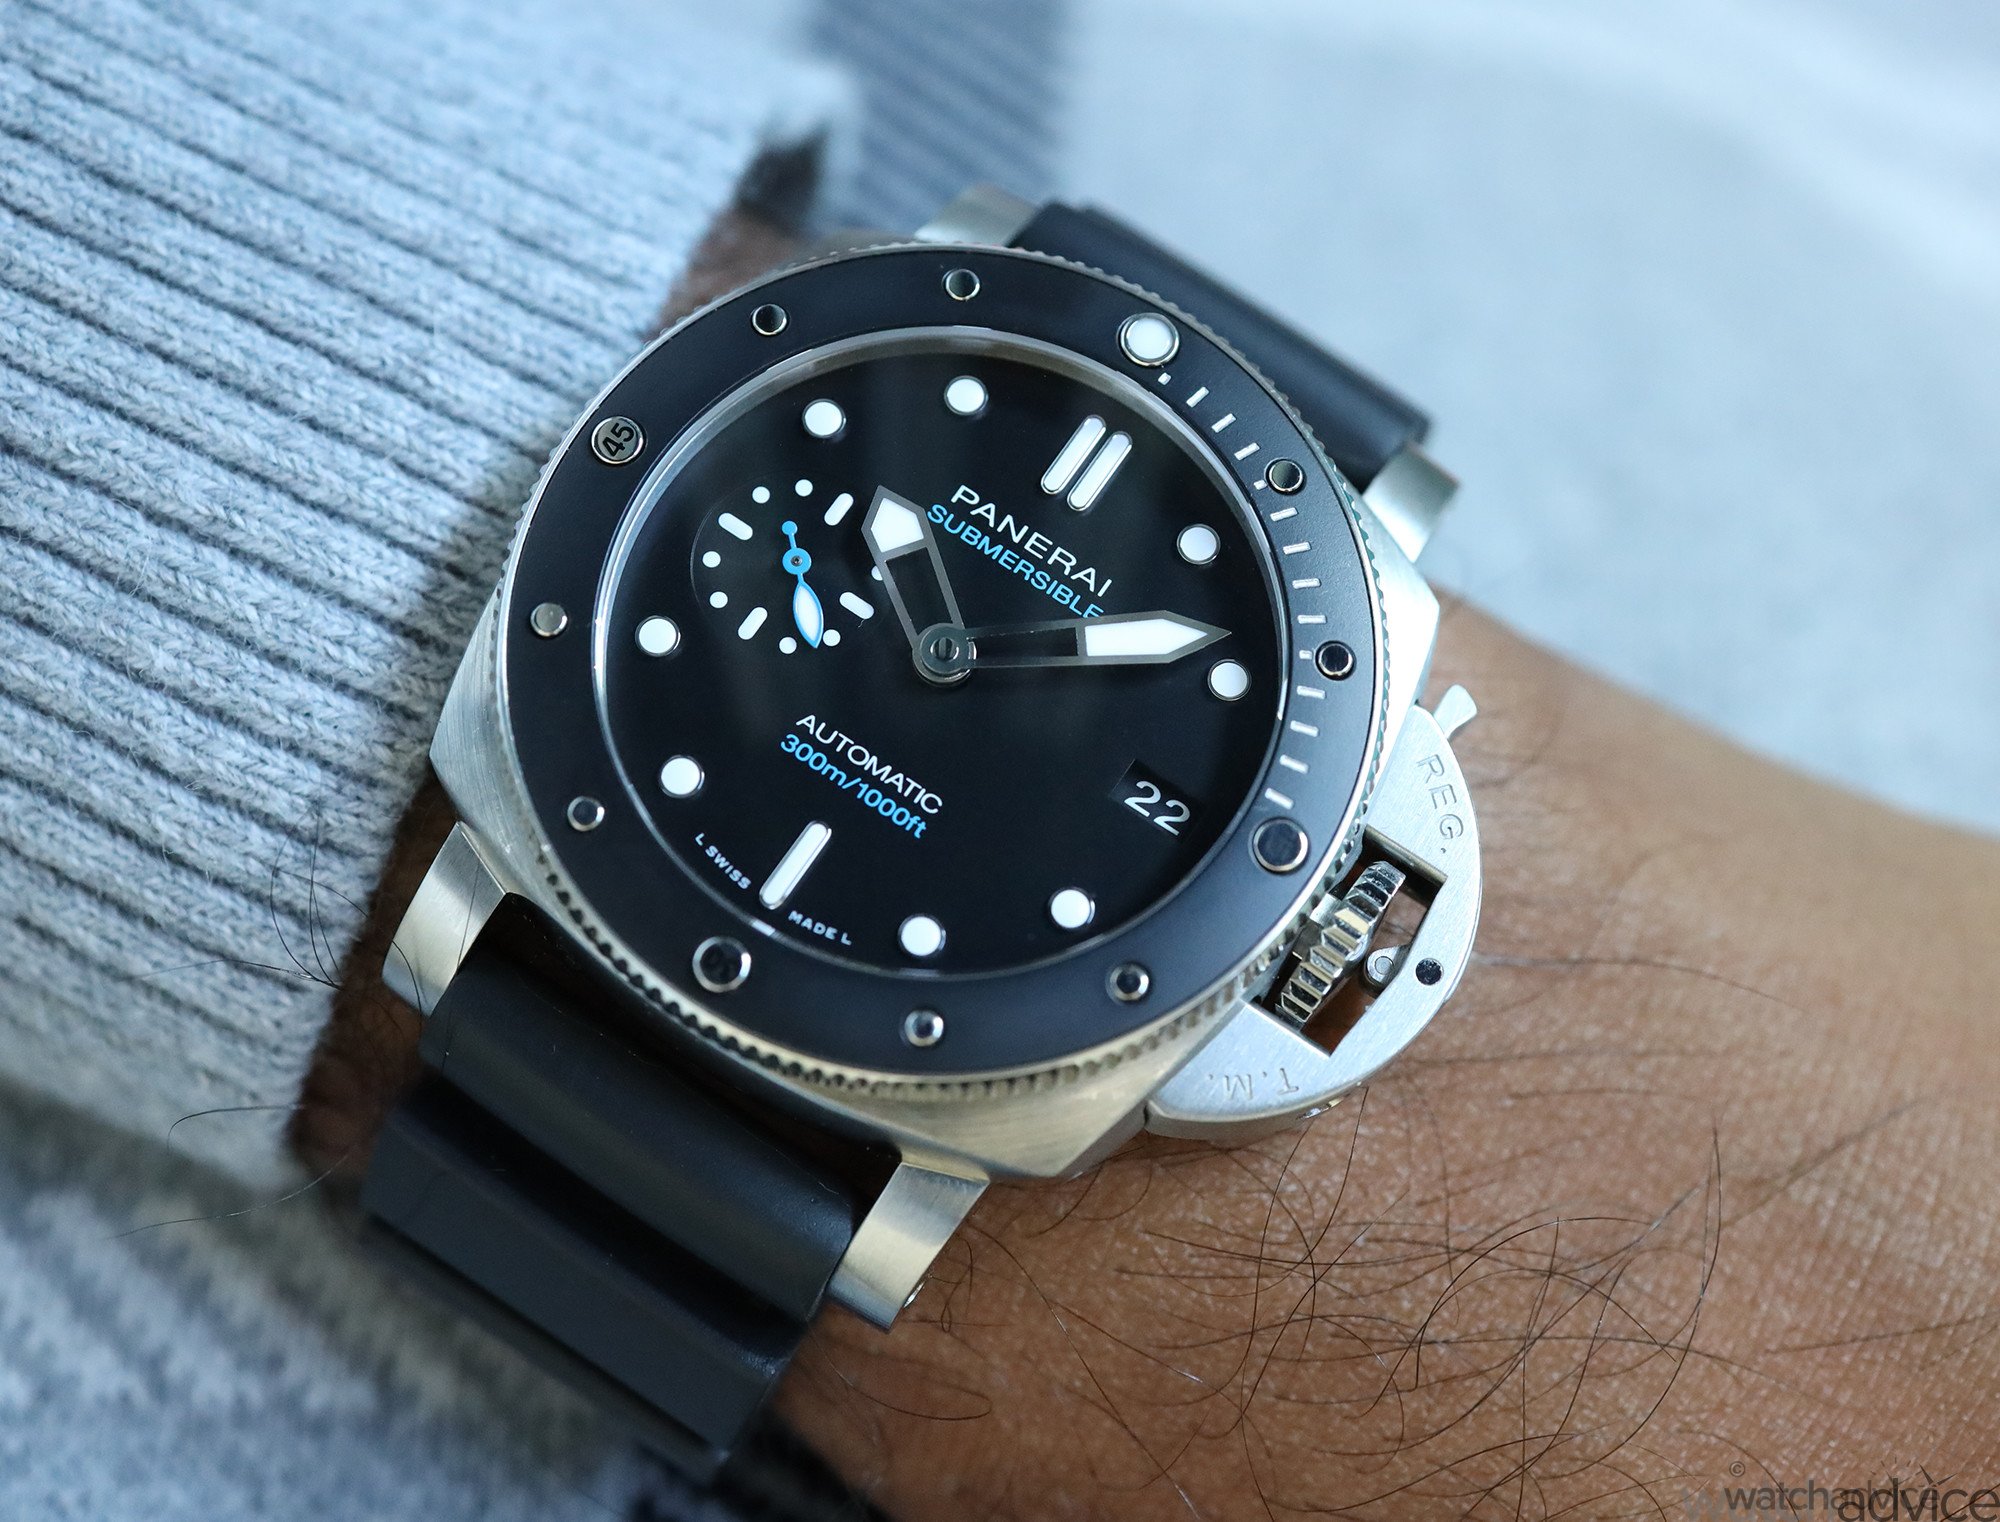 2021 Panerai Submersible 42mm PAM00683 Review – Watch Advice